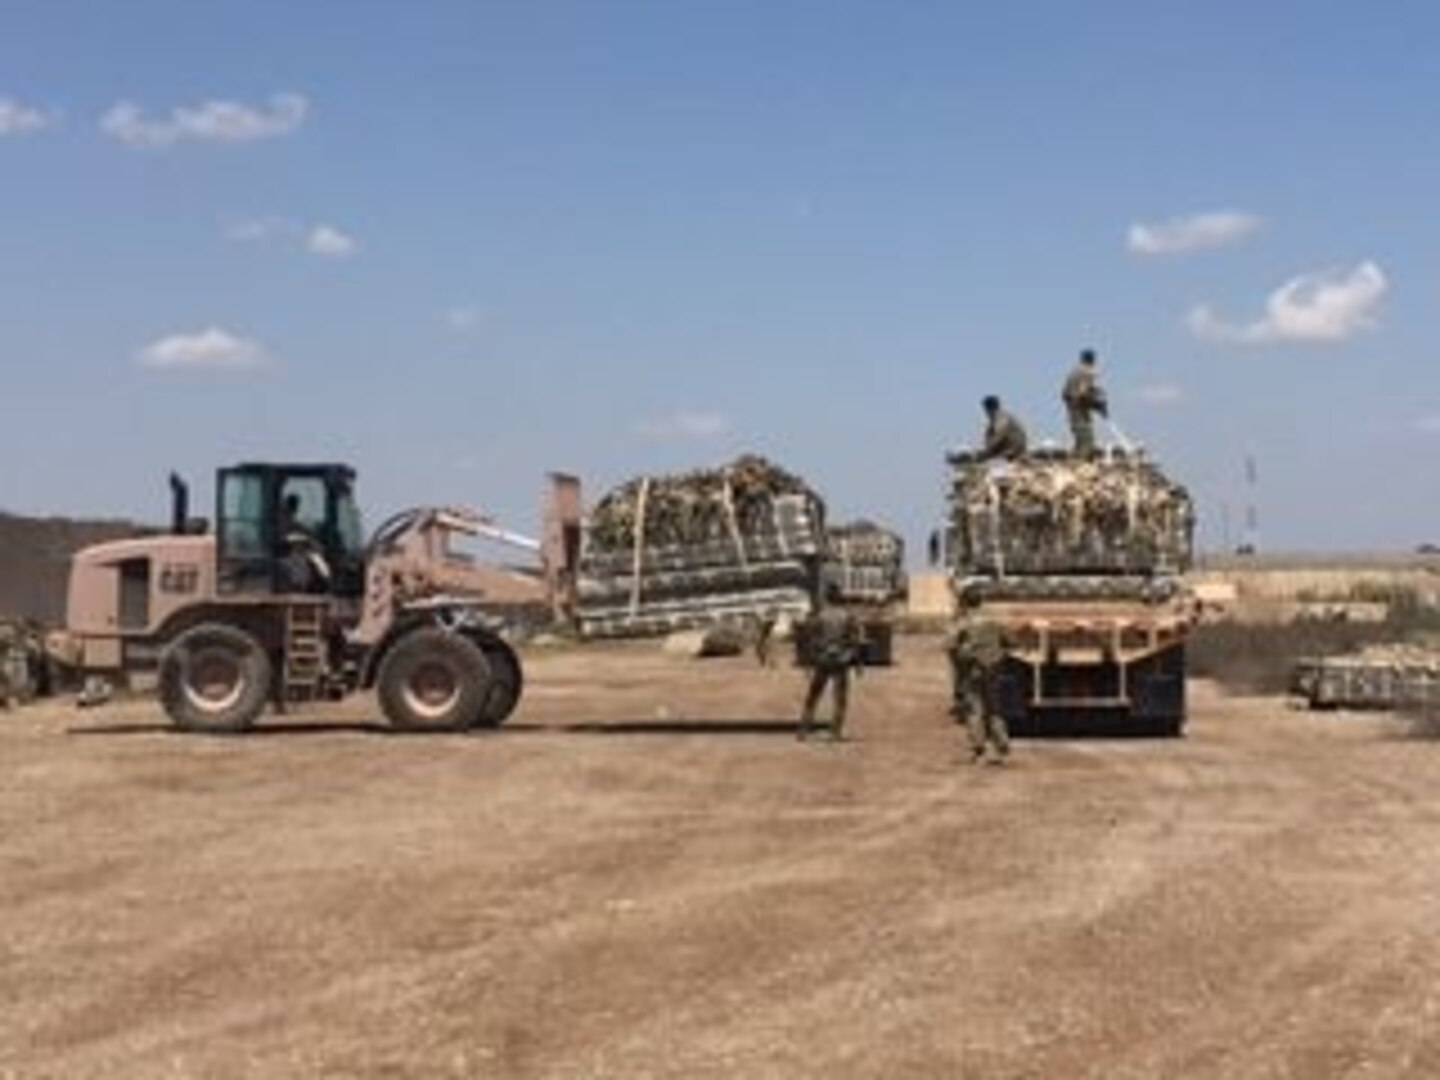 Members of the Iraqi air force and the U.S. Army 574th Combat Support Command work together to load recovered 463L pallets onto an U.S. Army truck at Al Muthana Air Base, Iraq, April 16, 2017. The pallet recovery initiative, led by aerial porters at the Baghdad Diplomatic Support Center, Iraq, involved the recovery of more than 1,500 aircraft pallets and 1,600 cargo nets, which were used for foreign military sales cargo destined for the Iraqi military to fight ISIS in Mosul. (U.S. Air Force courtesy photo)